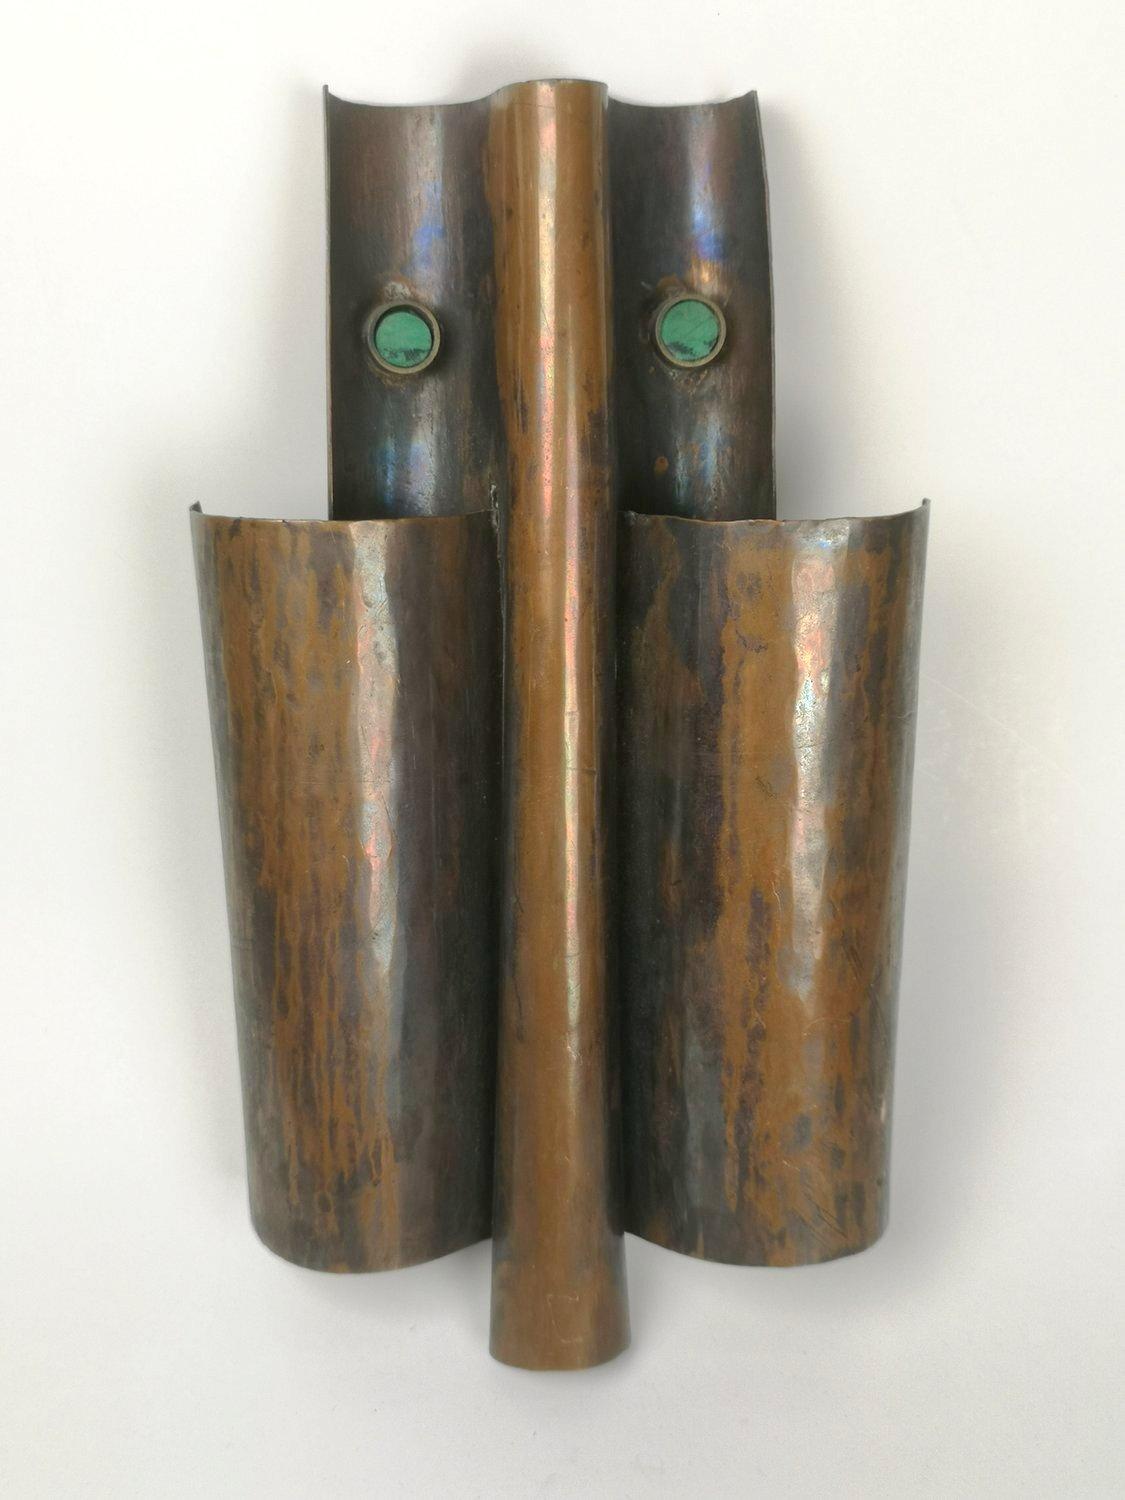 An applied art piece, made of copper depicting an abstract male head. The eyes are enameled. A very decorative item.